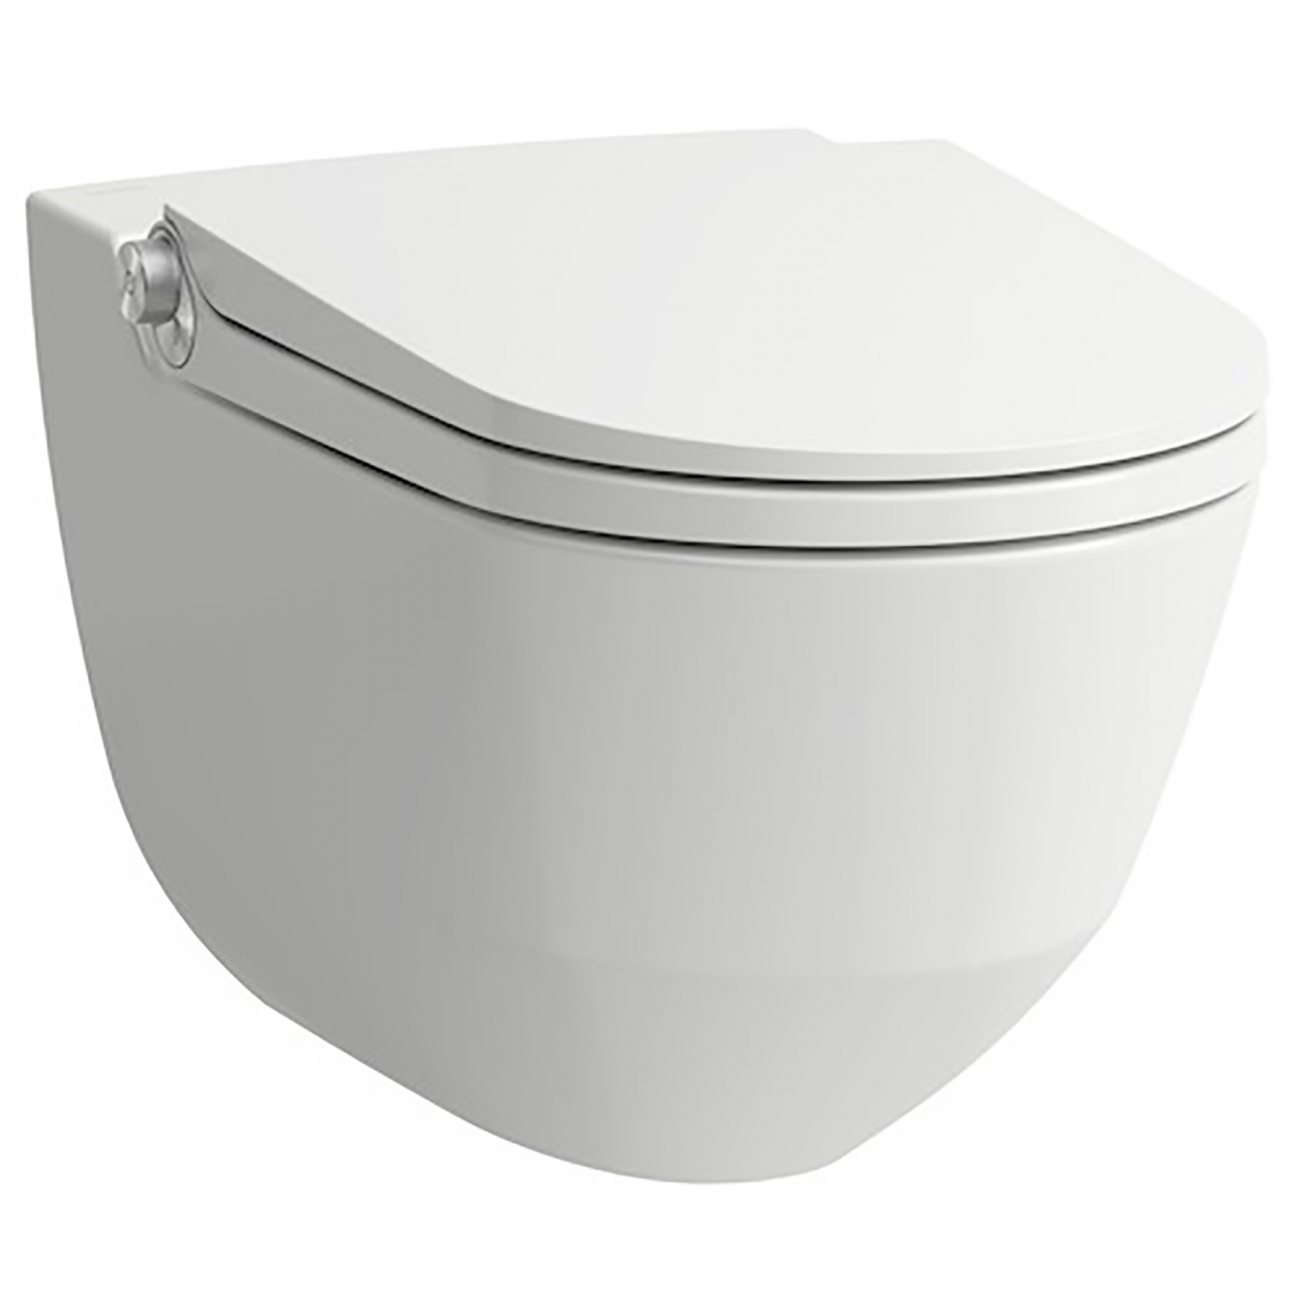 Laufen Cleanet Riva suspended wc